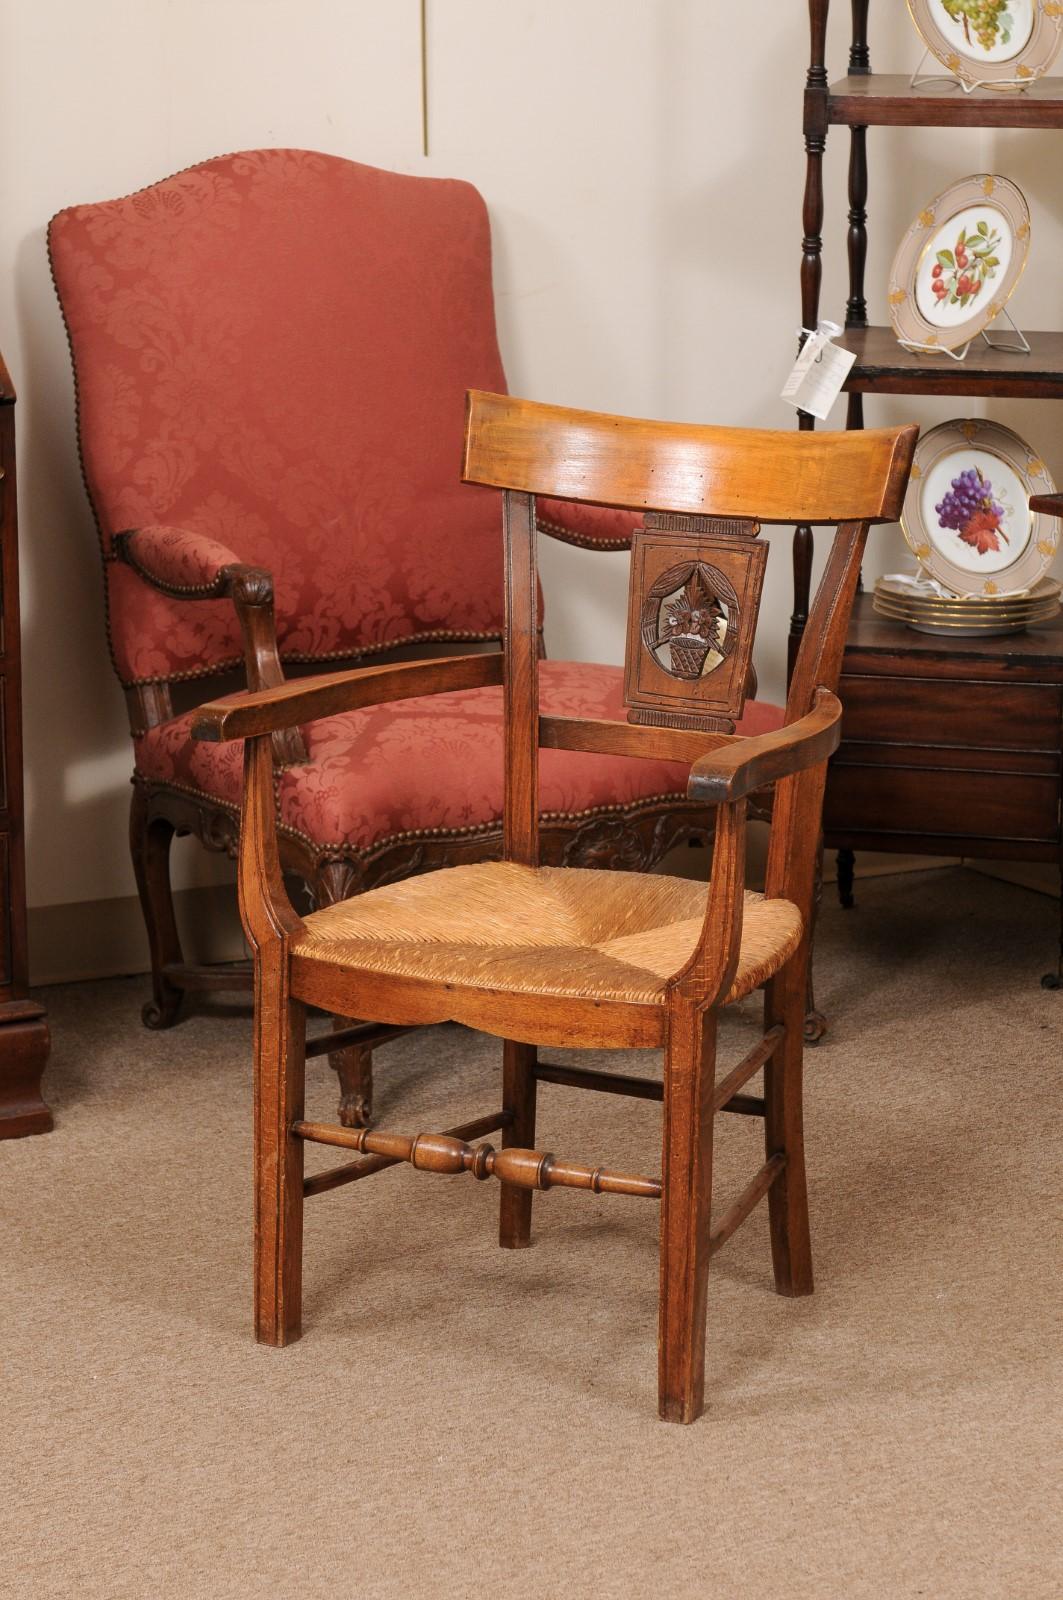 Fruitwood Rush Seat Armchair with Flower Basket Backsplat, Italy ca. 1850 For Sale 1